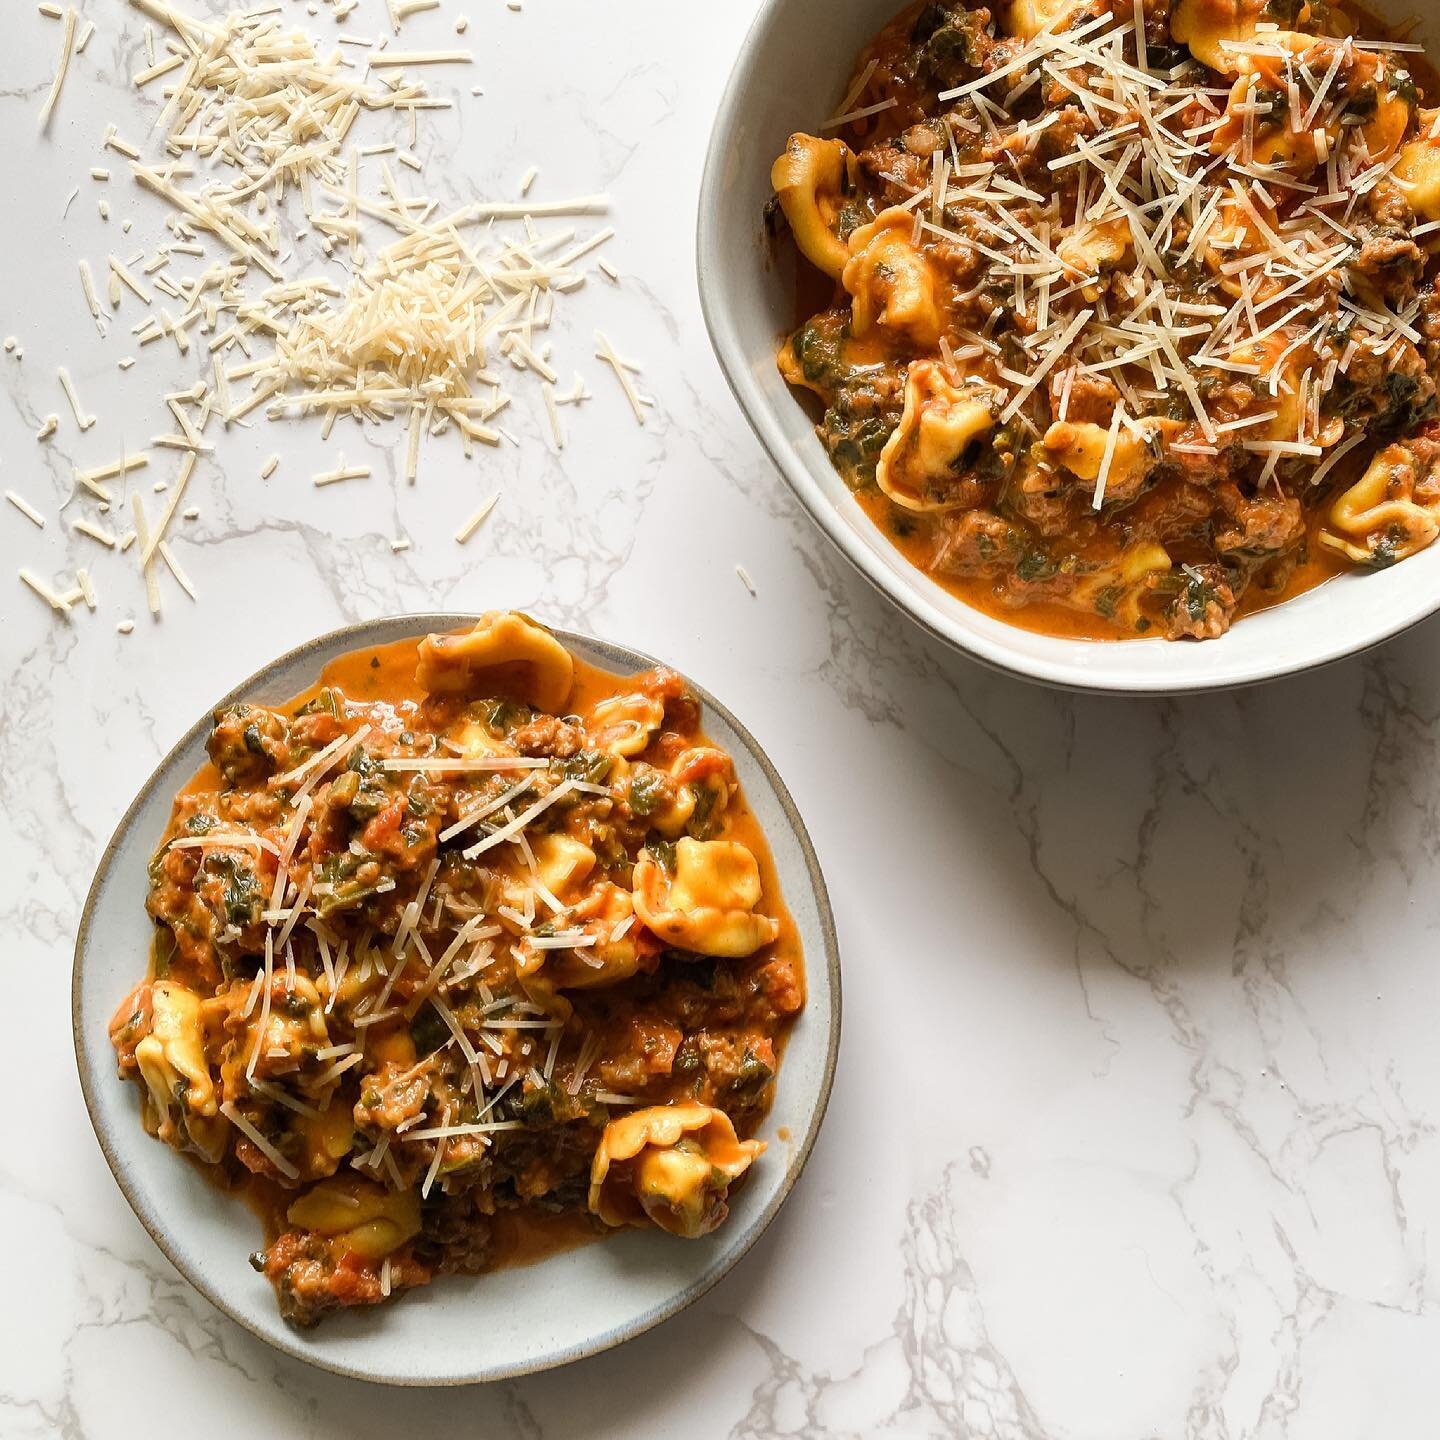 I love cooking (no surprise 🤪) but #onepanmeals are my go-to because I hate dishes 🤭 this one is a goodie 👉🏼 ONE PAN TORTELLINI is a weeknight staple 🤩 check it out at mashed.com